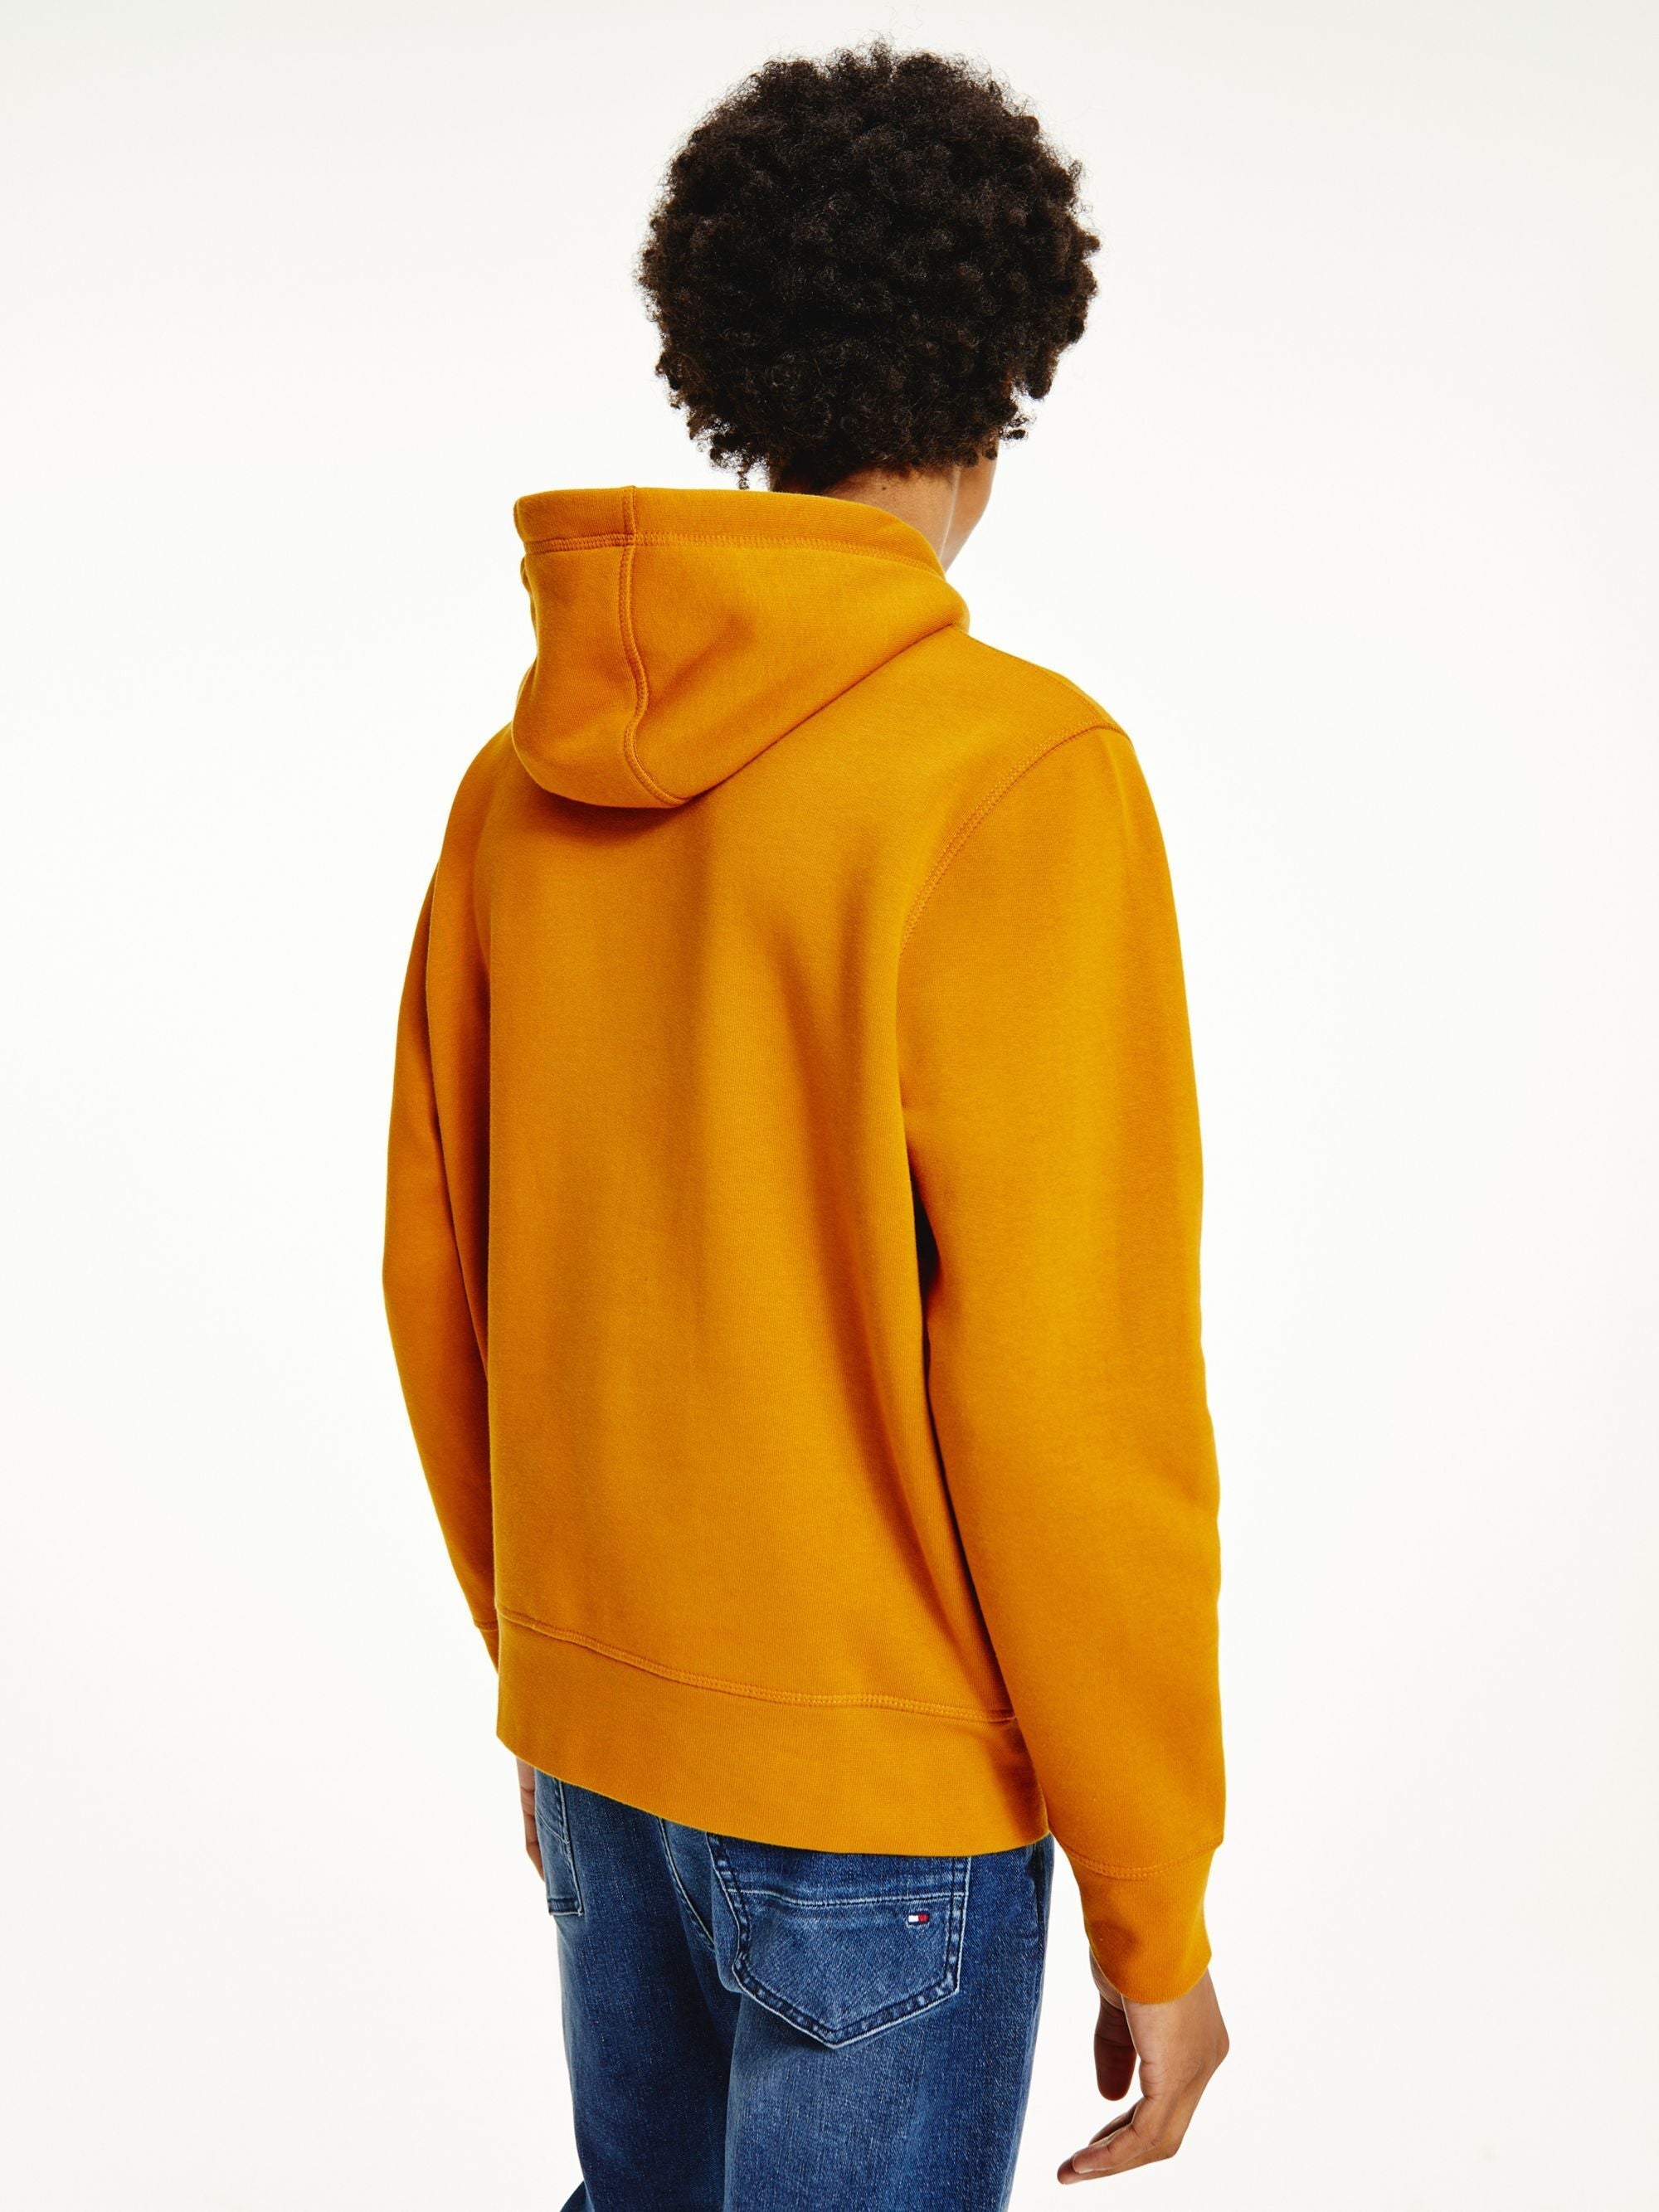 Tommy Logo Hoody - Crest Gold